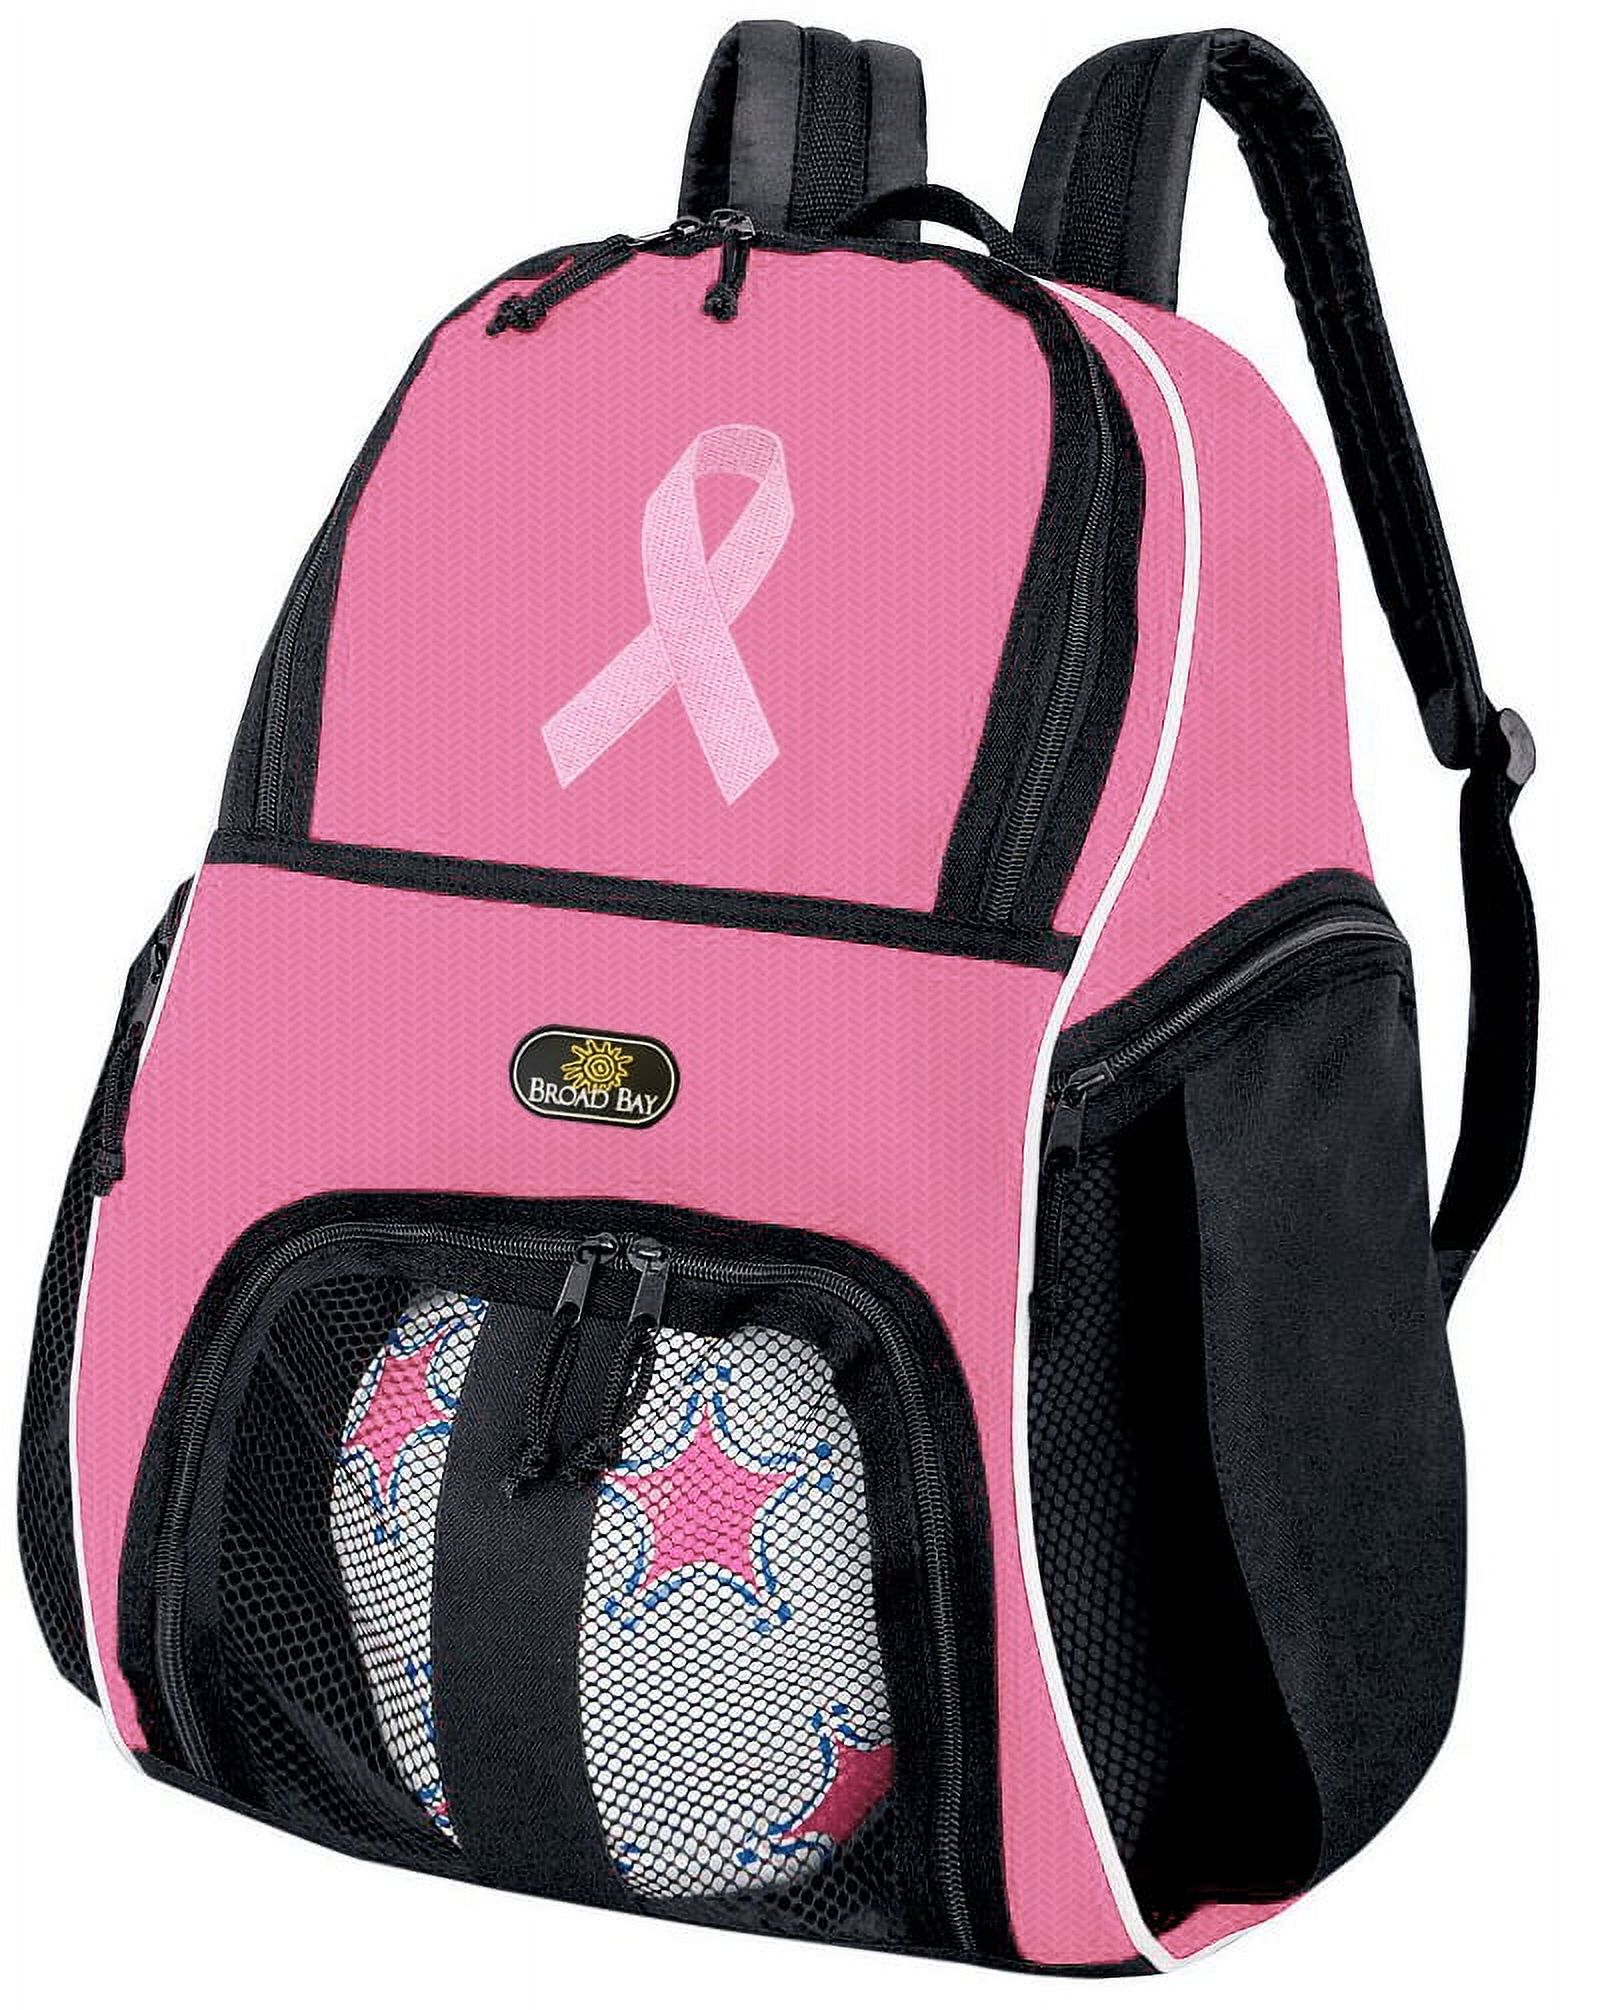 Girls Pink Ribbon Soccer Backpack or Womens Pink Ribbon Volleyball Bag - image 1 of 4